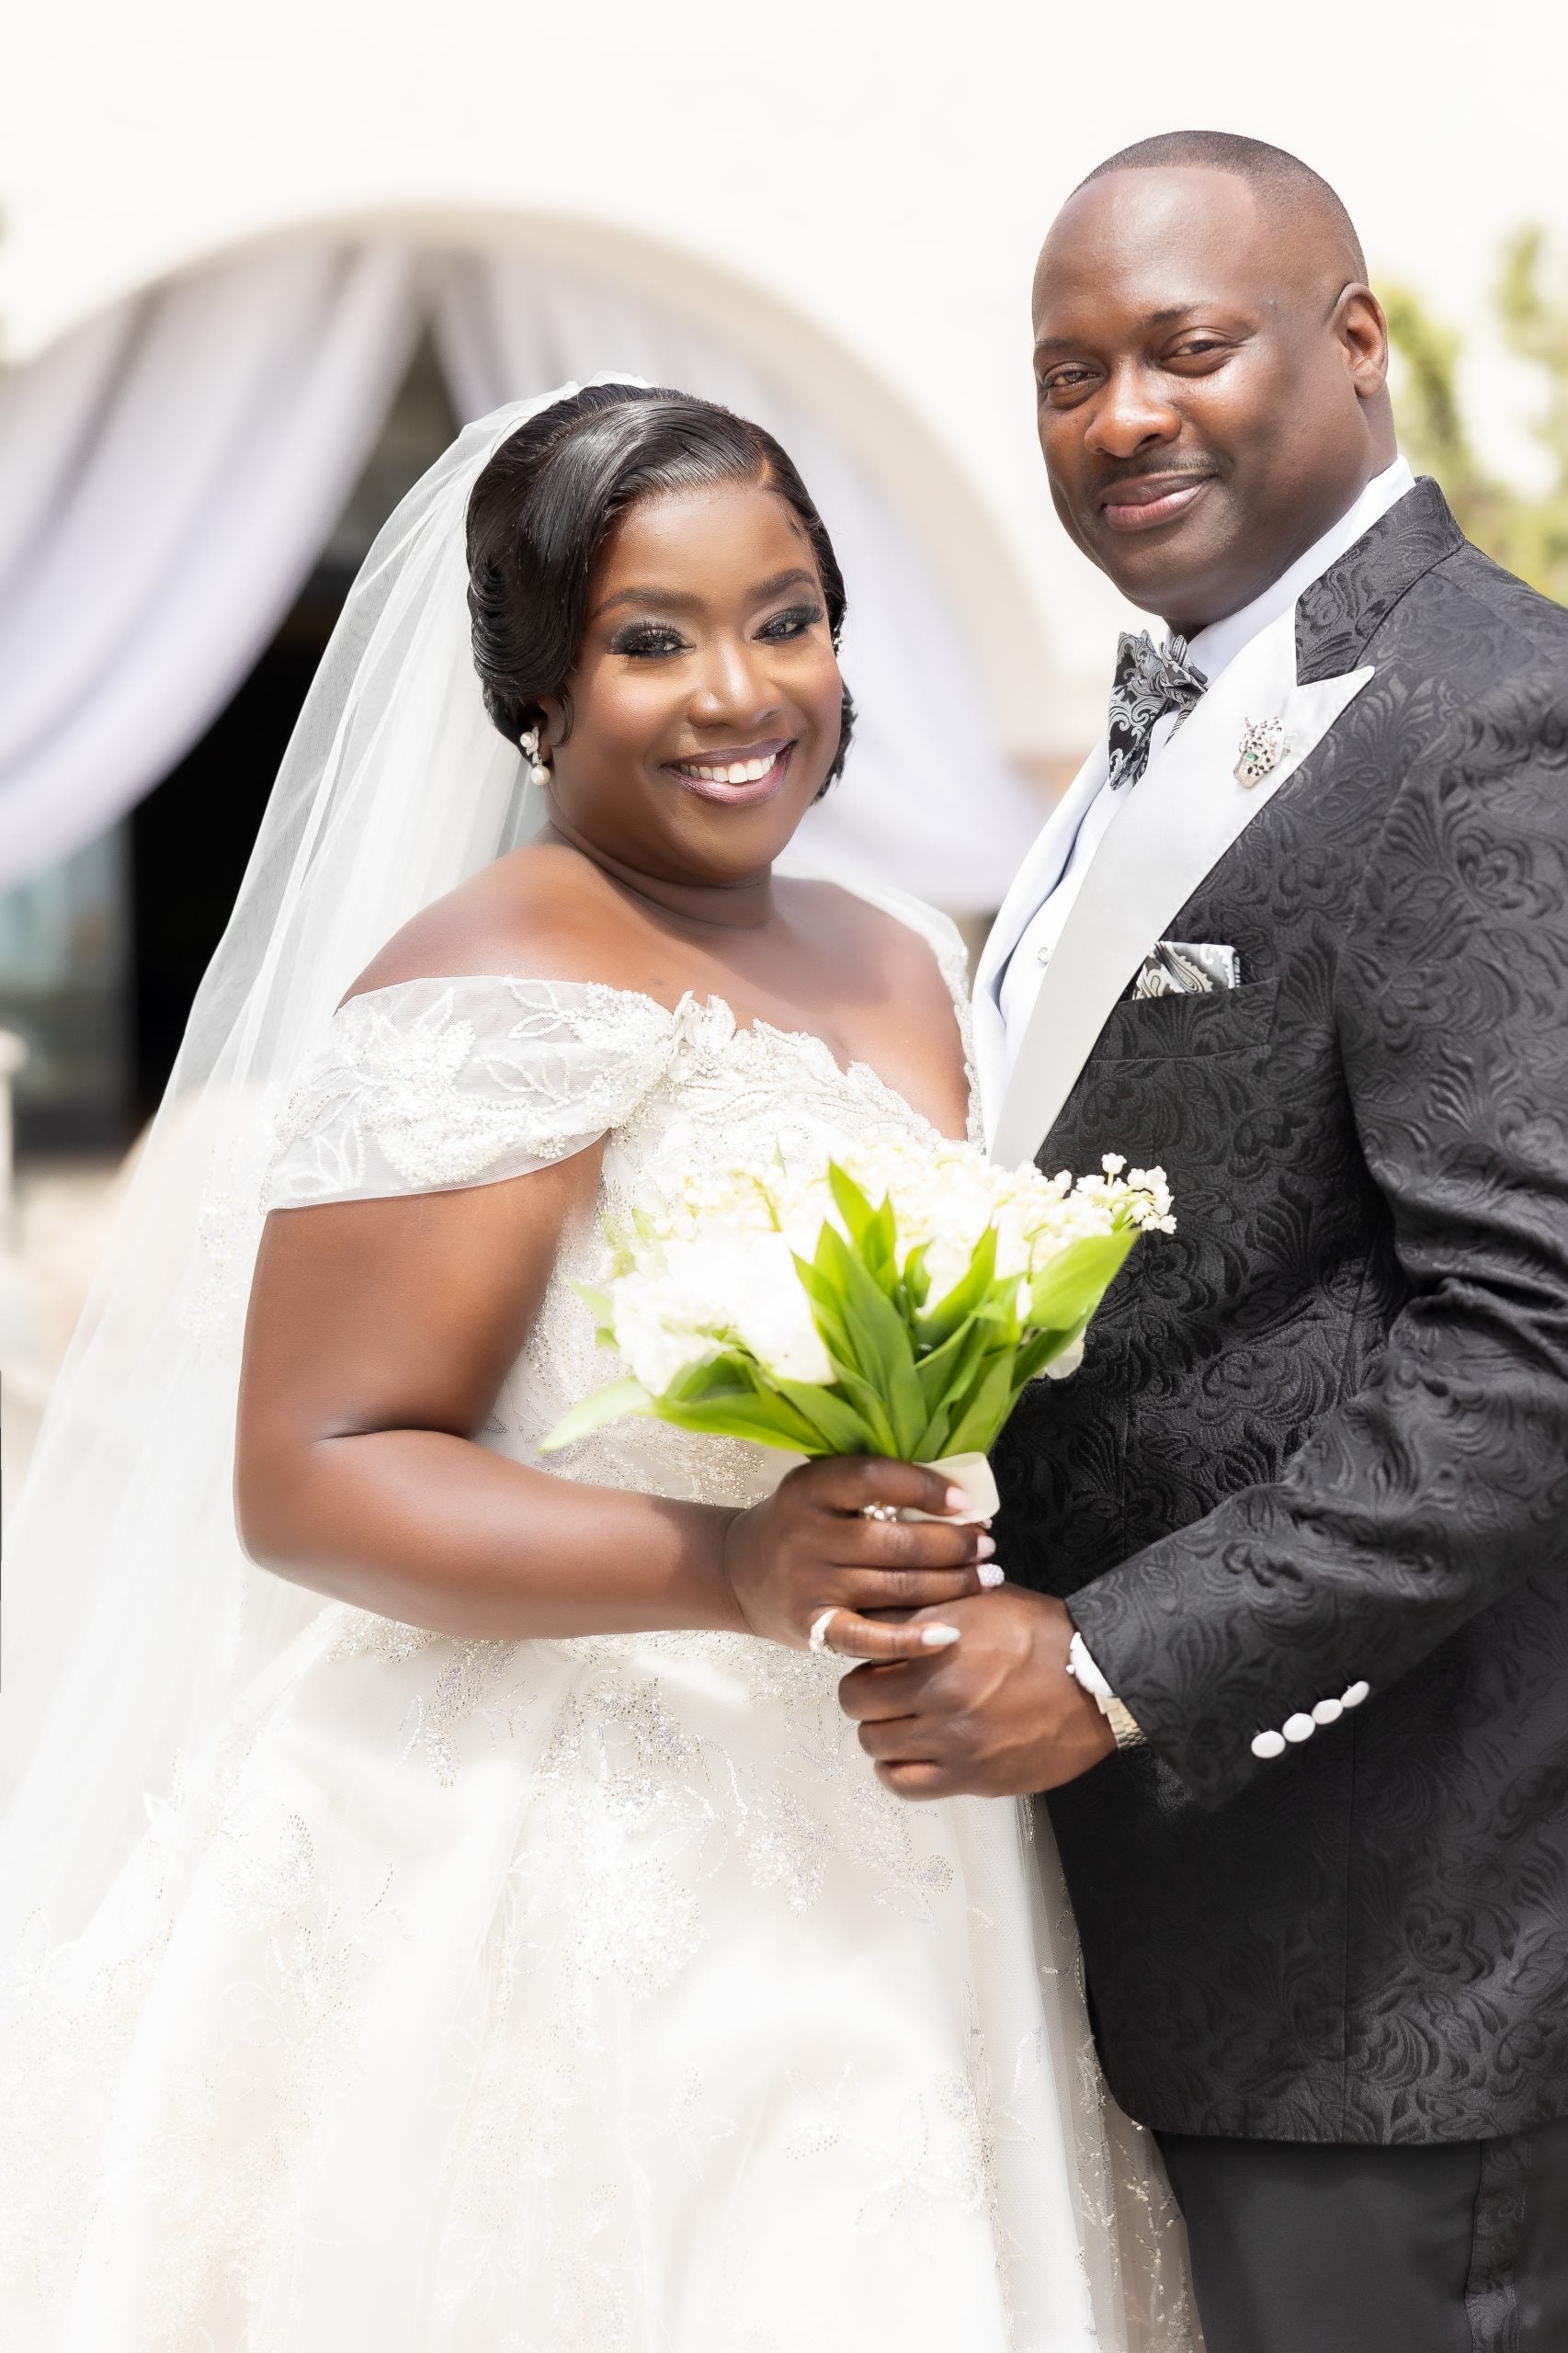 Bridal Bliss: Kelley And Moreno’s Vintage Black Hollywood Themed Wedding Brought Out The Stars Of Today